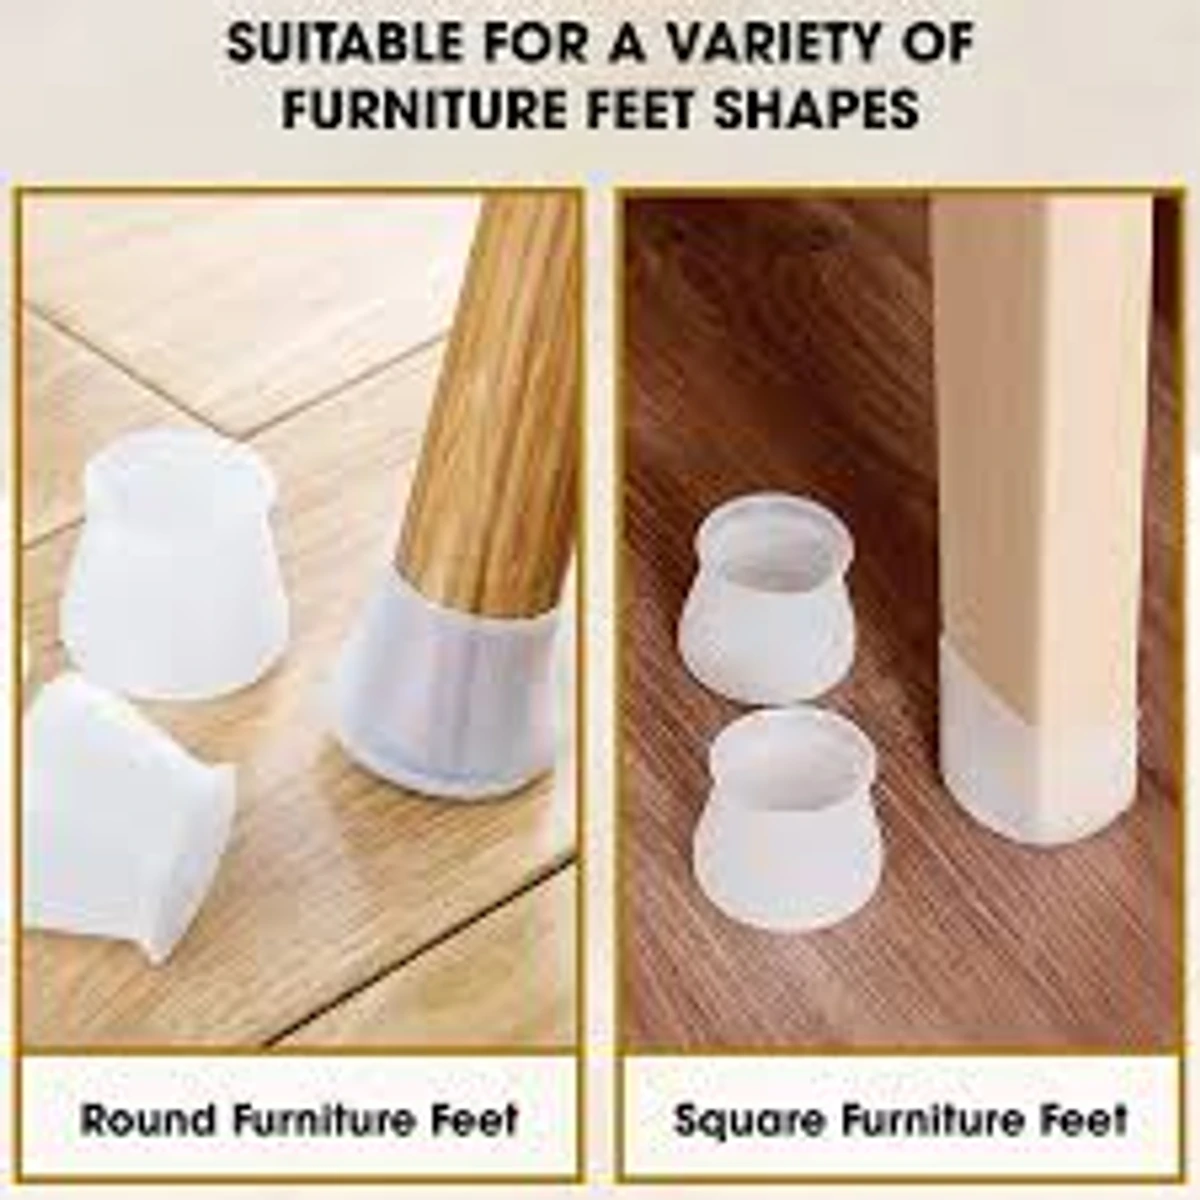 28 pcs Chair Leg Floor Protectors Felt Bottom Furniture Silicone Leg Caps, Chair Leg Covers to Reduce Noise, Easily Moving for Furniture Chair Feet,(white colour)